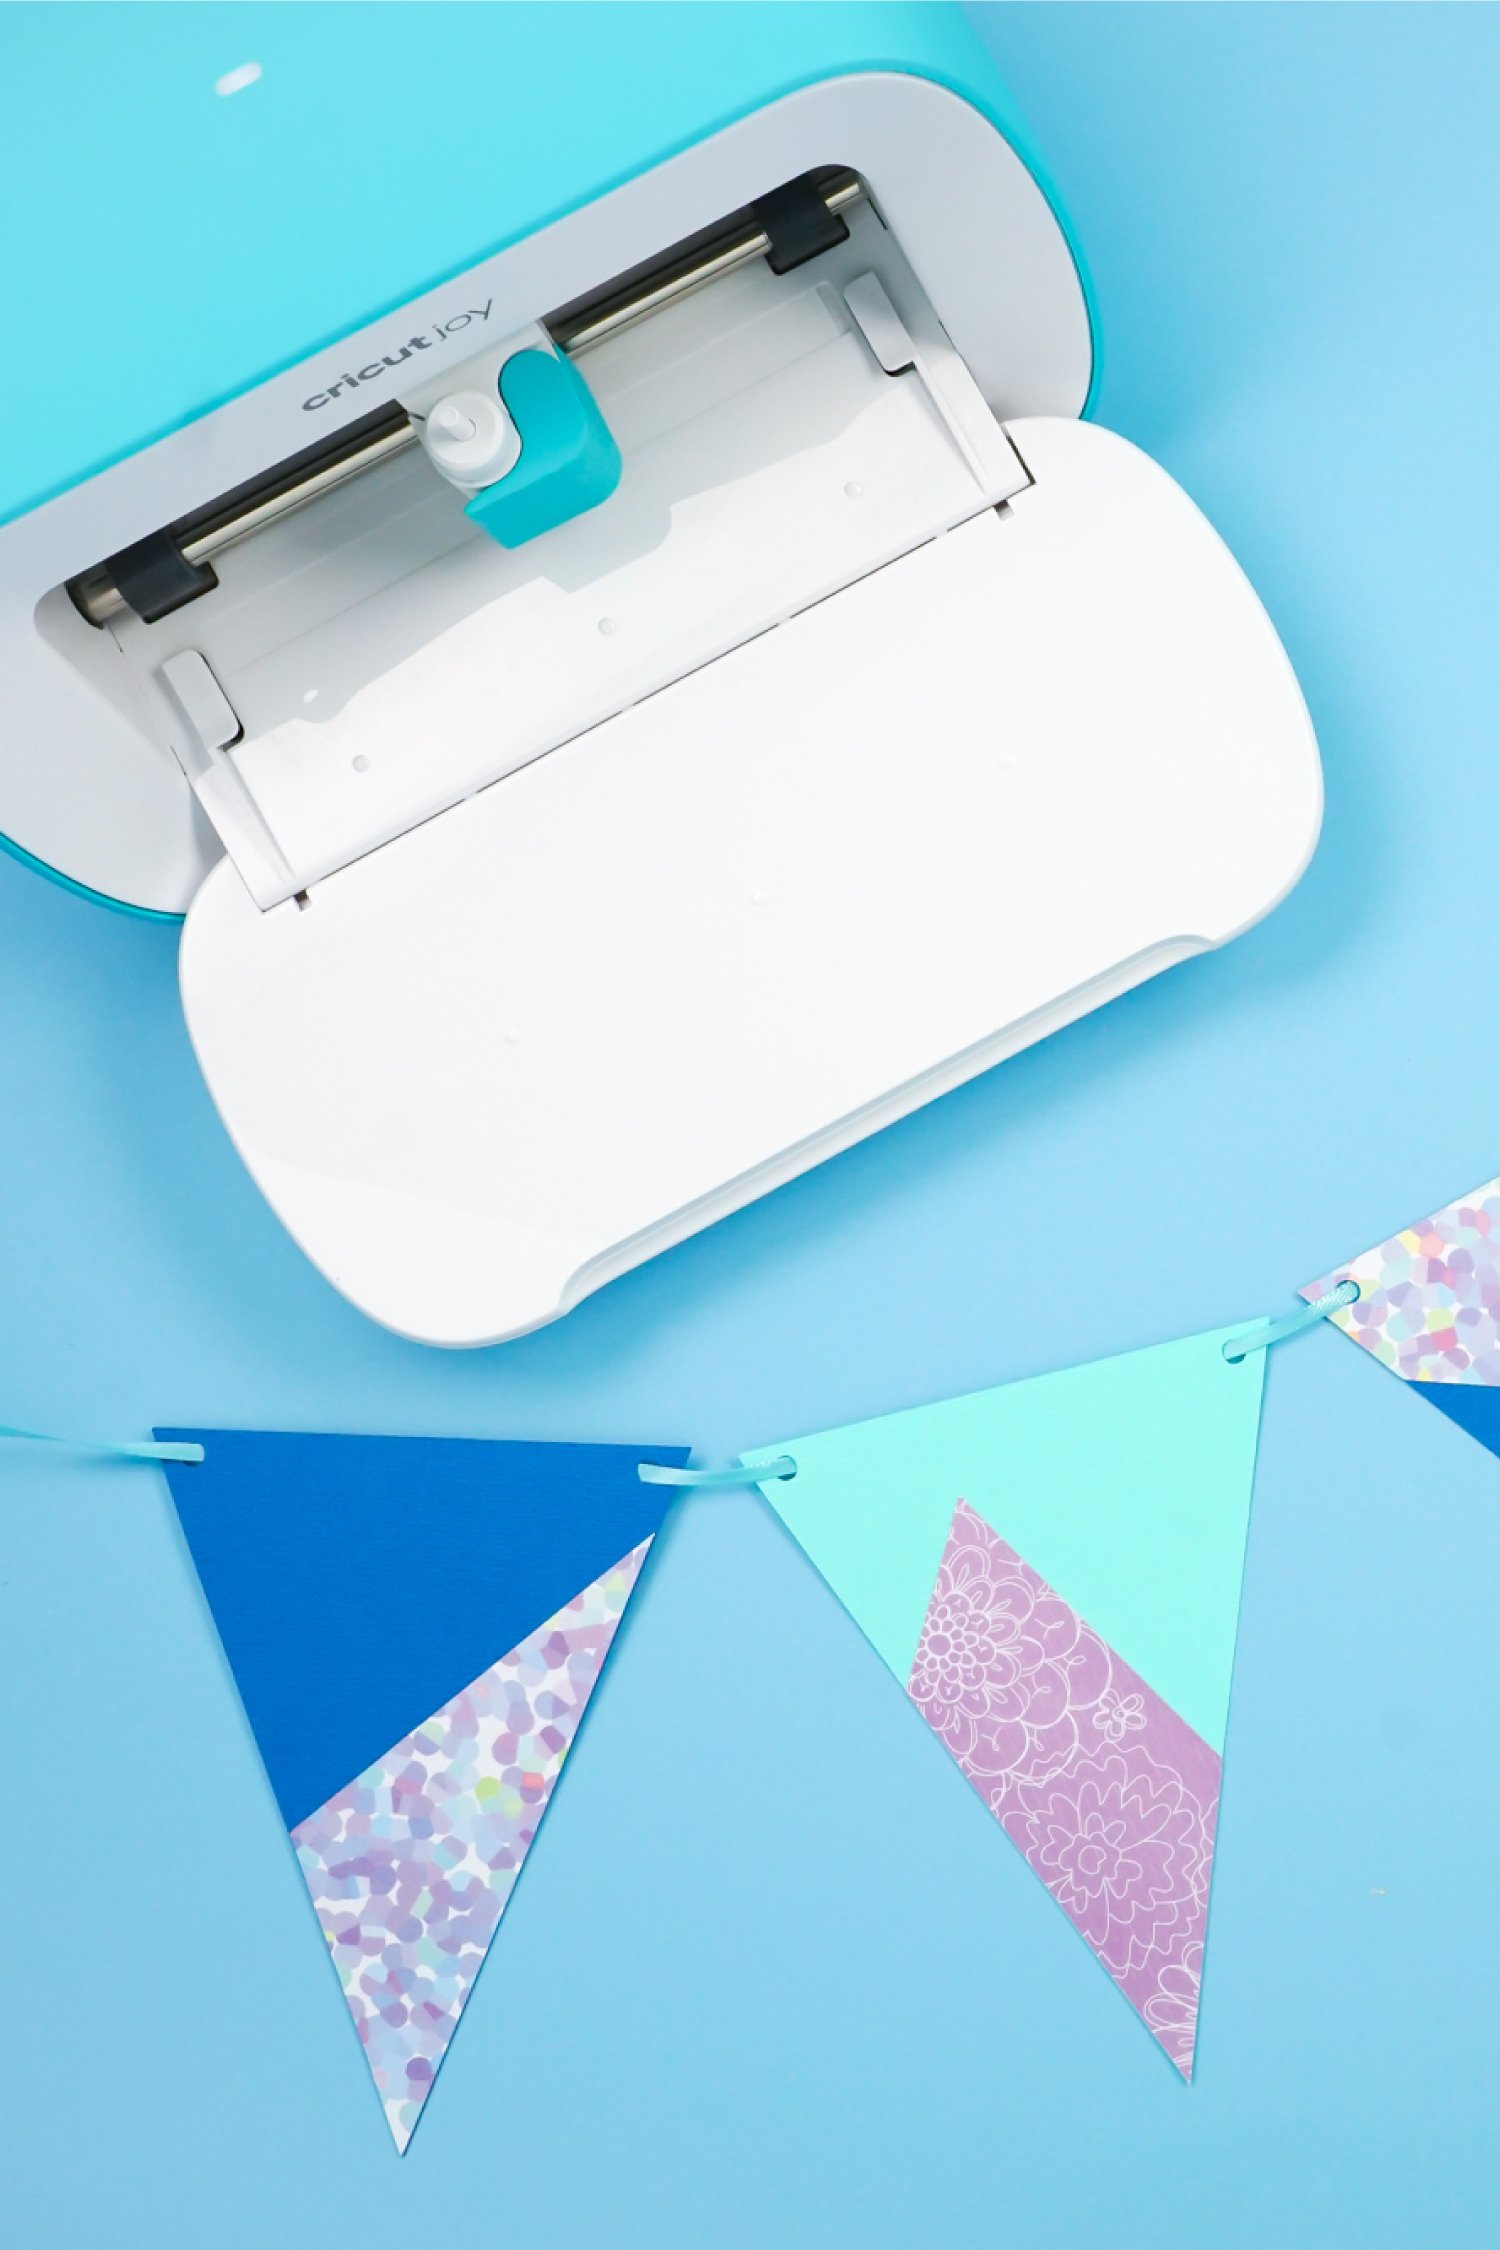 Take a Look at the New Cricut Deluxe Papers